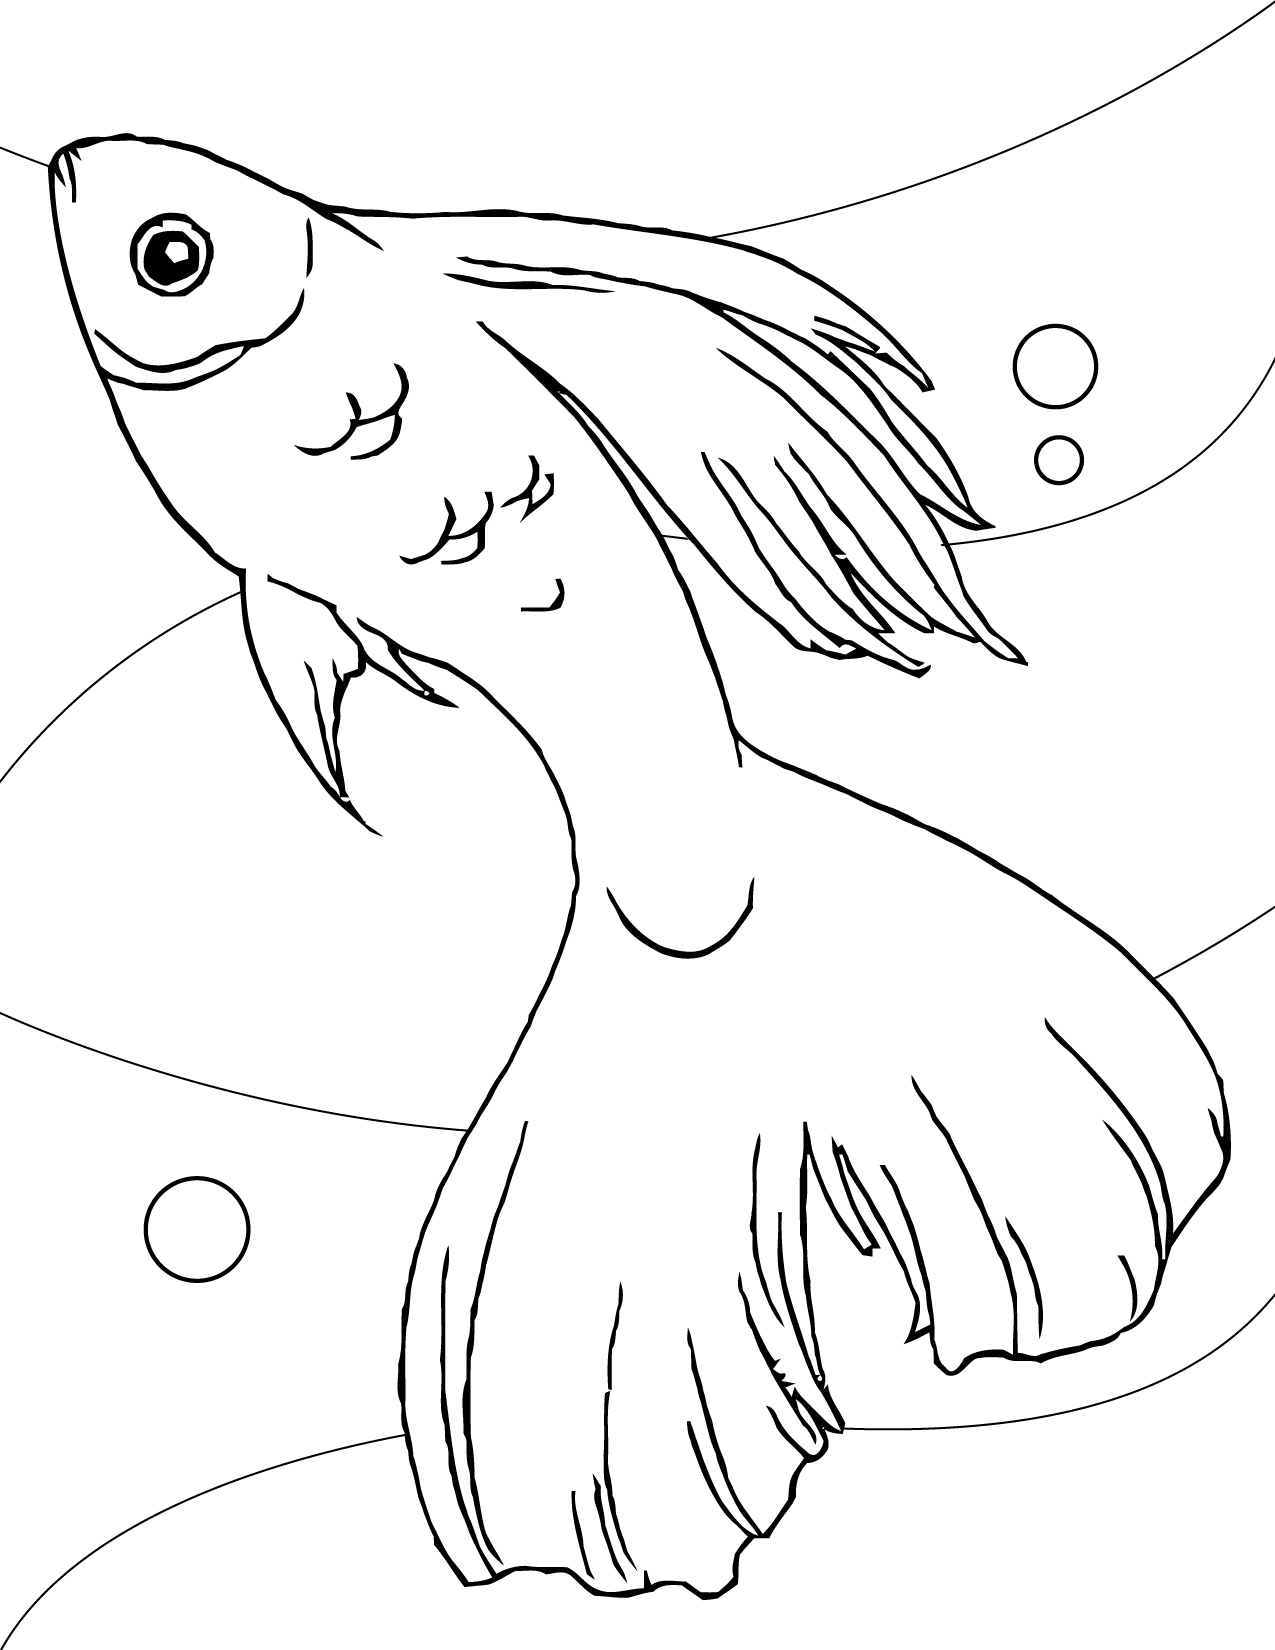 Free School of Salt Water Fish Coloring Sheet - Animal Coloring Pages